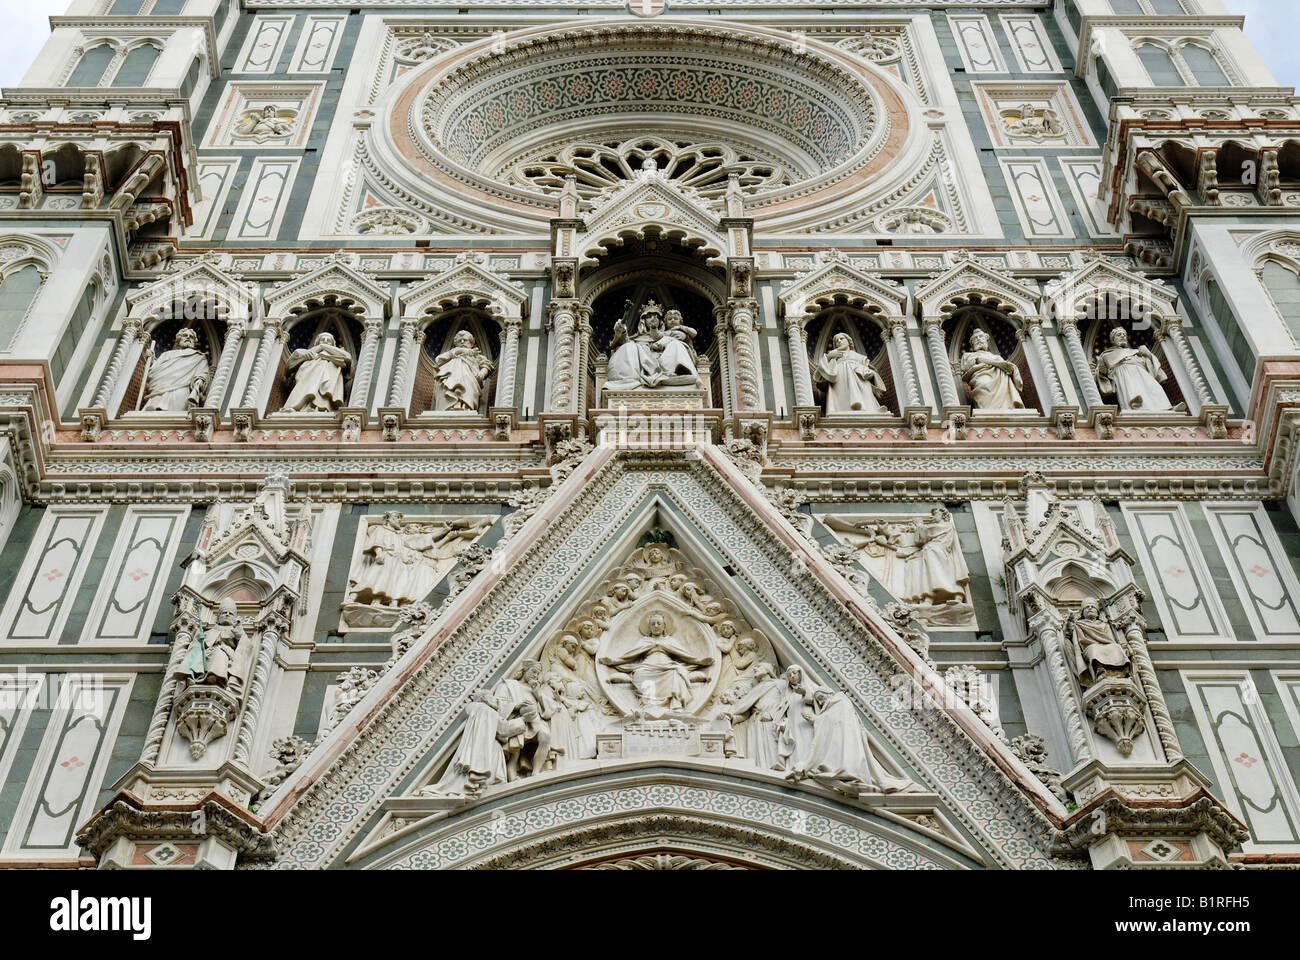 Decorated marble fassade of the cathedral, Duomo Santa Maria del Fiore, UNESCO world heritage site, Florence, Tuscany, Italy, E Stock Photo